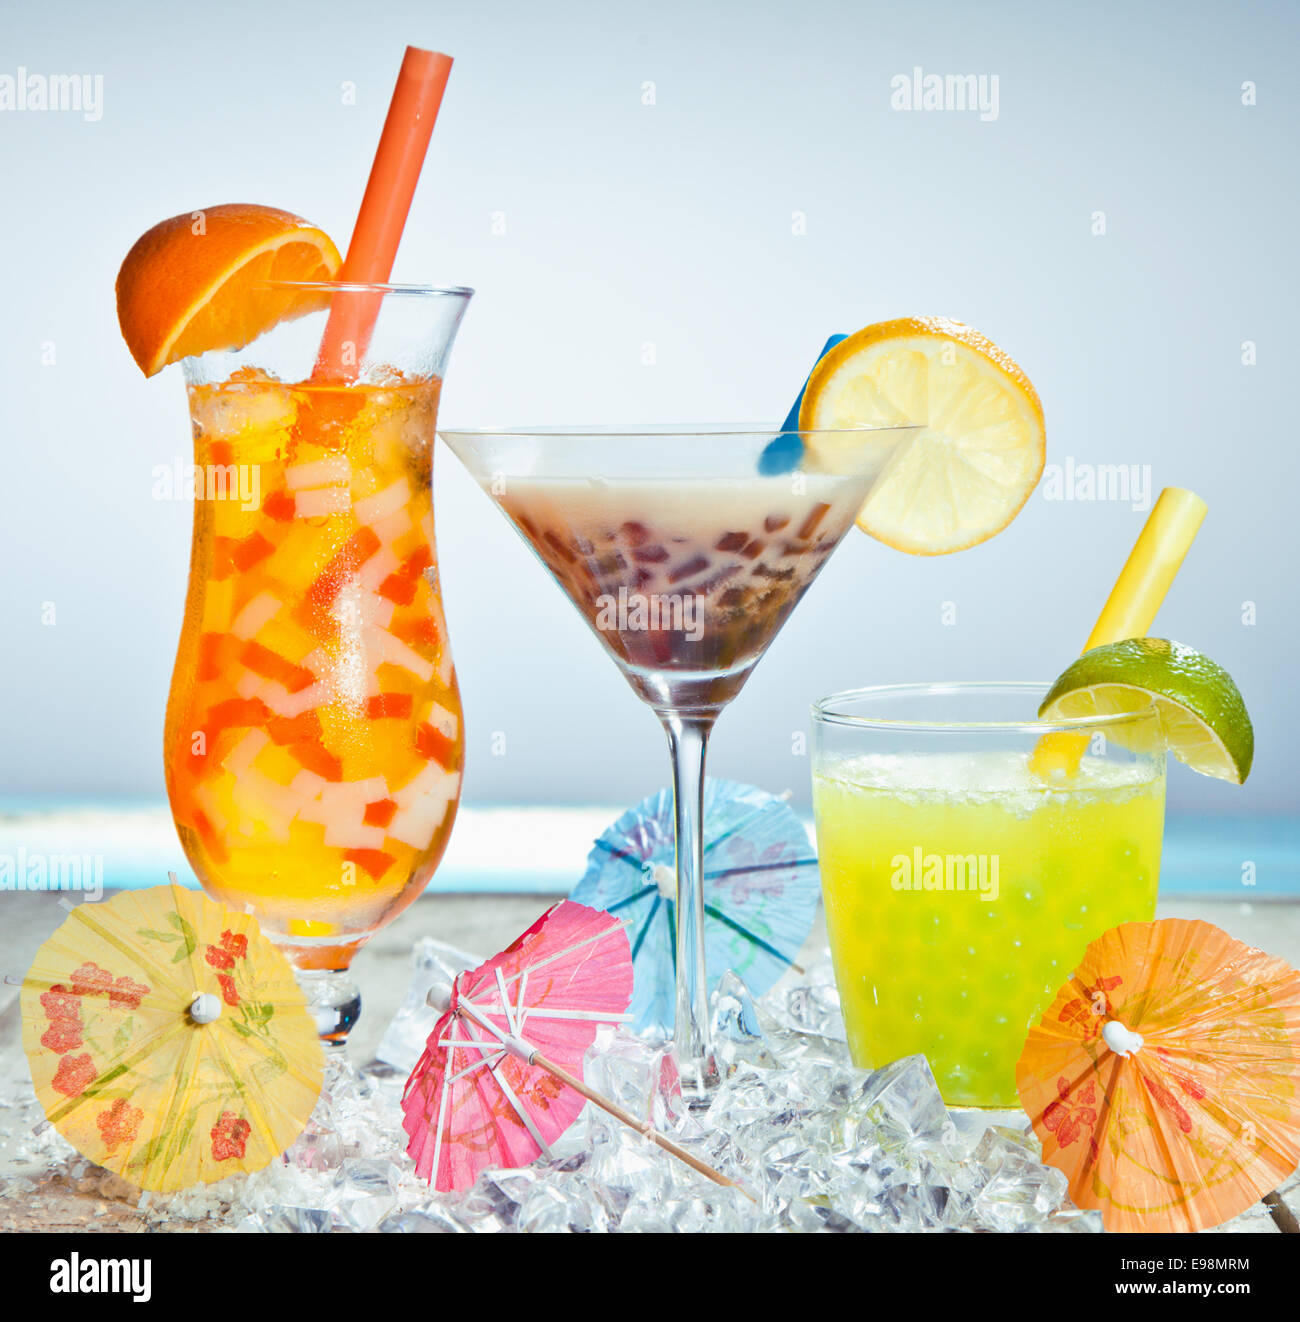 Three different boba tea cocktails with mango, orange, coffee and lime flavored. With paper umbrellas. Stock Photo